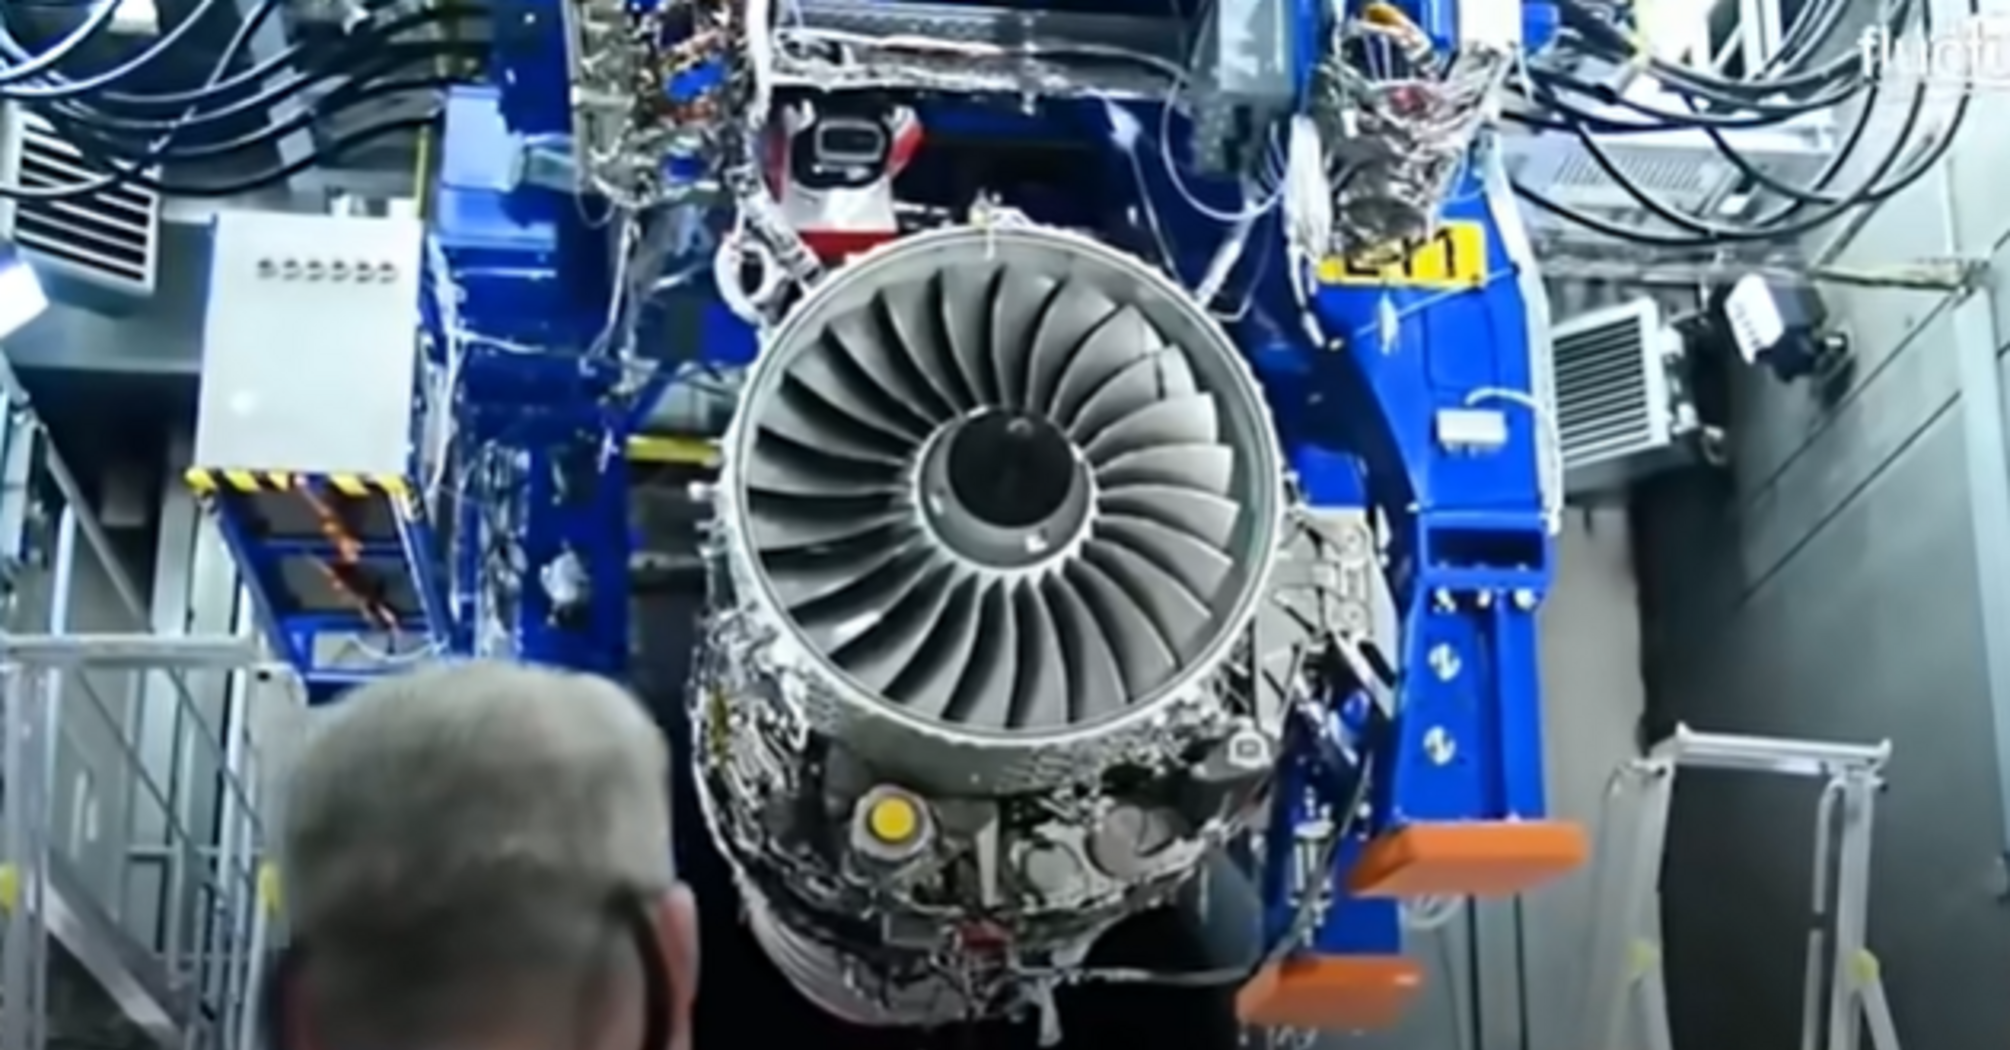 Developing the most advanced aircraft engine